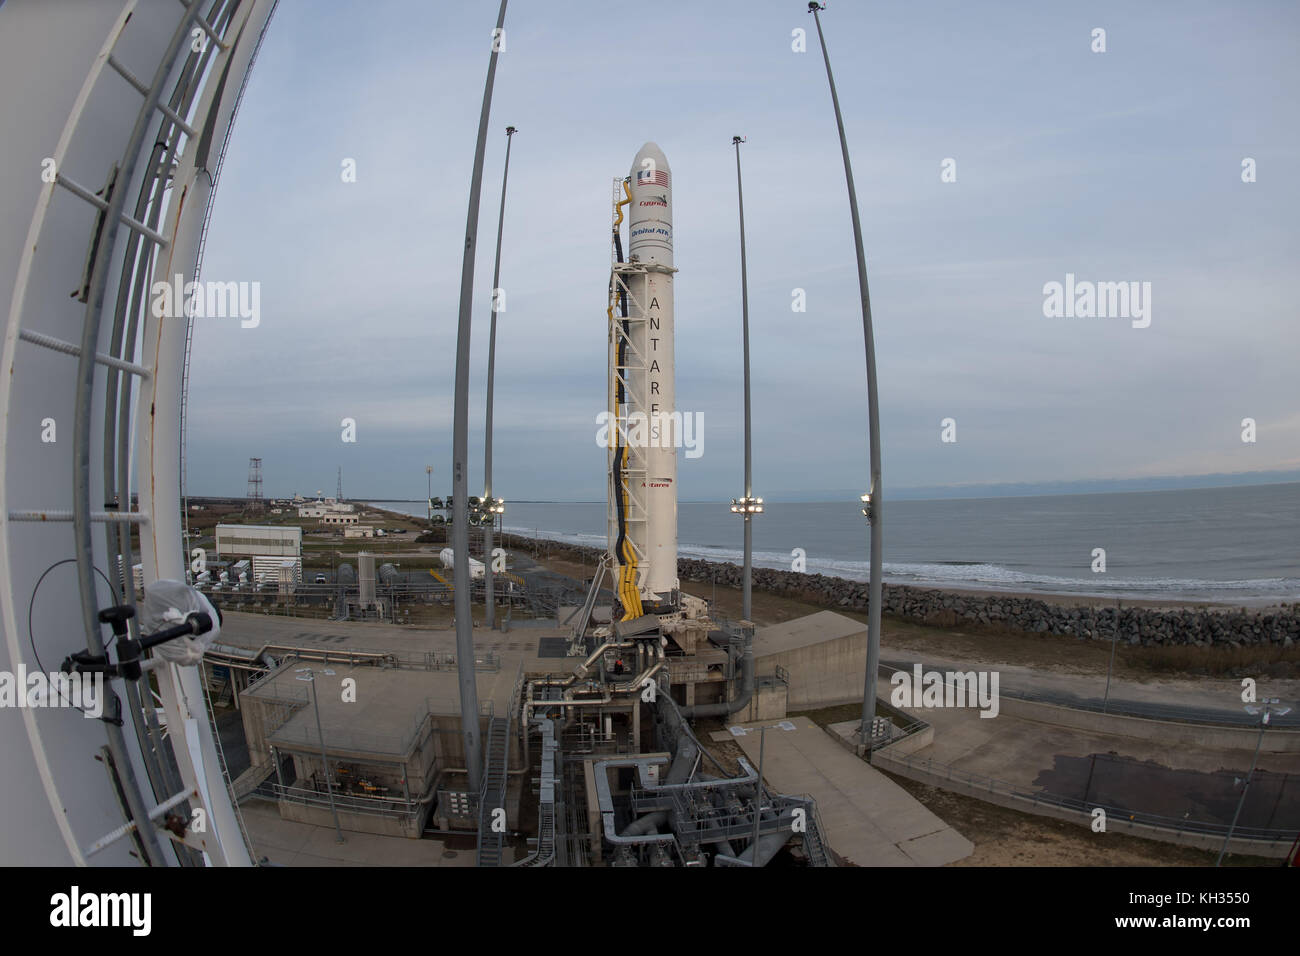 The Orbital ATK Antares rocket carrying the Cygnus space capsule is readied for launch Pad-0A at Wallops Flight Facility November 11, 2017 in Wattsville, Virginia. The rocket was delayed after an aircraft entered the restricted airspace delaying the launch by a day. Stock Photo